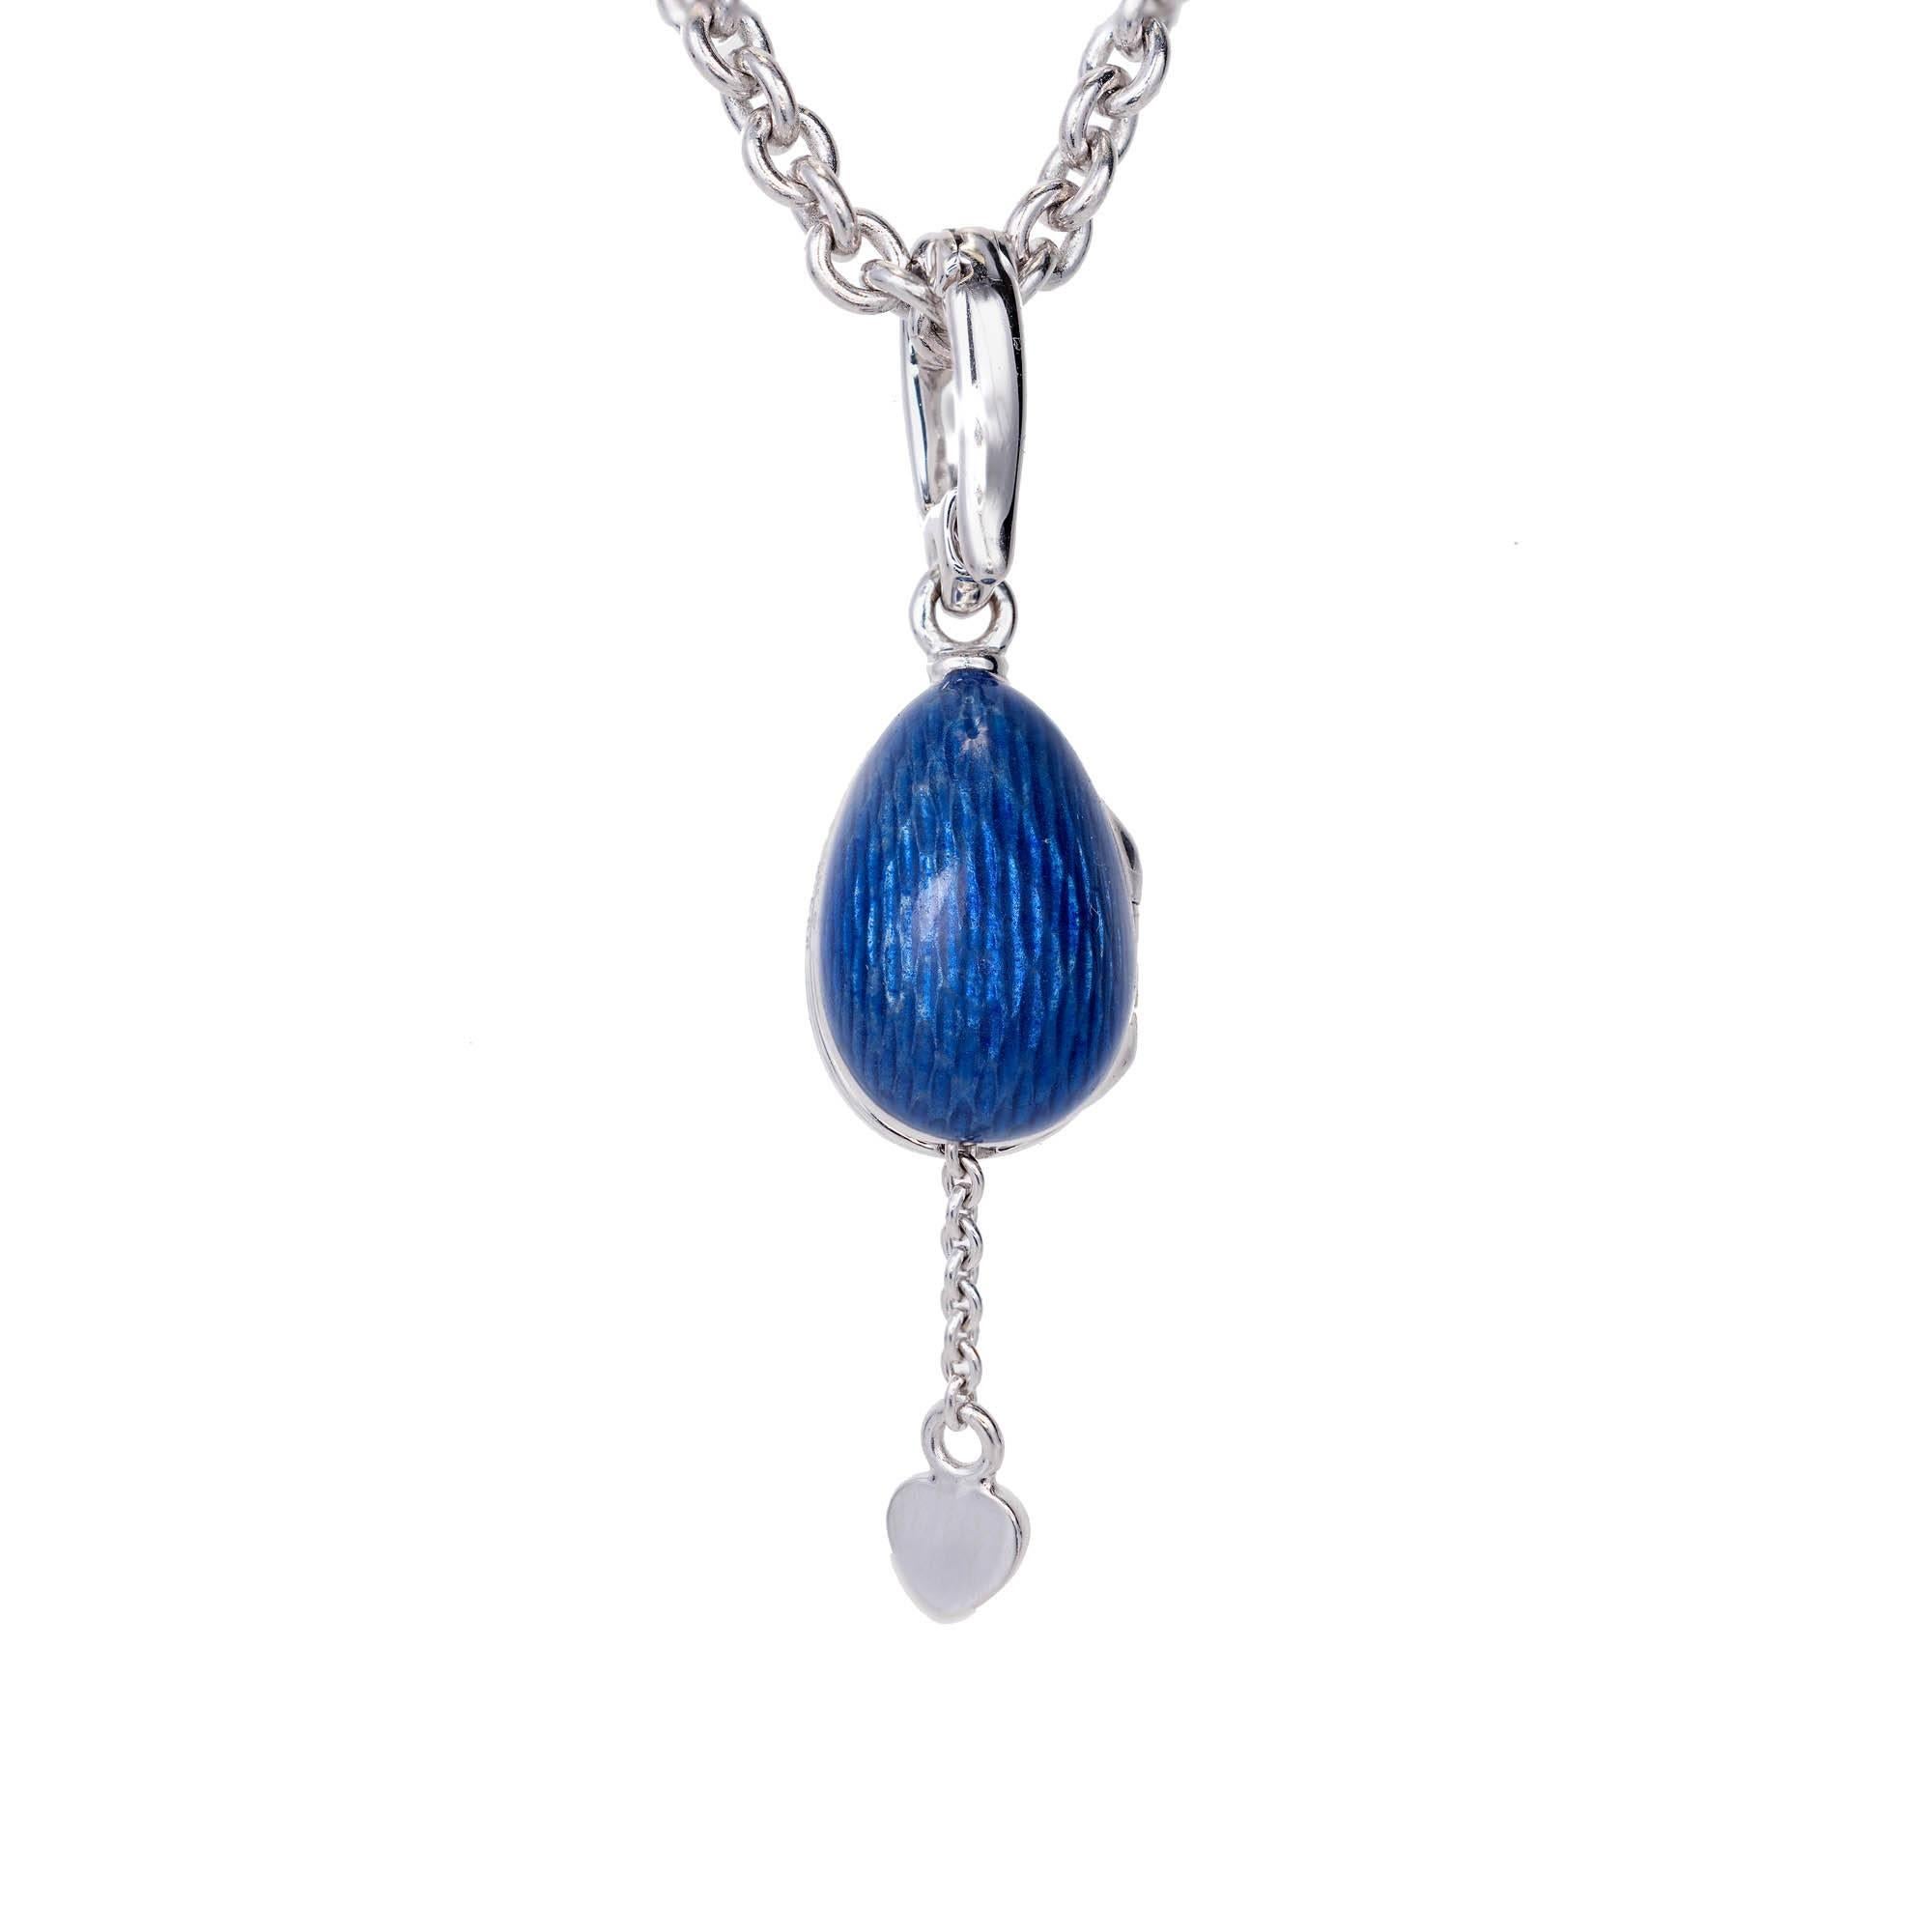 Fabergé Secret Heart egg pendant necklace. In 18k white gold with a hinged enhancer top on a Fabergé 18k 18-inch cable link chain. The egg is a limited edition 419 or 500. The chain is marked 203. Both are signed Fabergé.

1 round Diamond, approx.